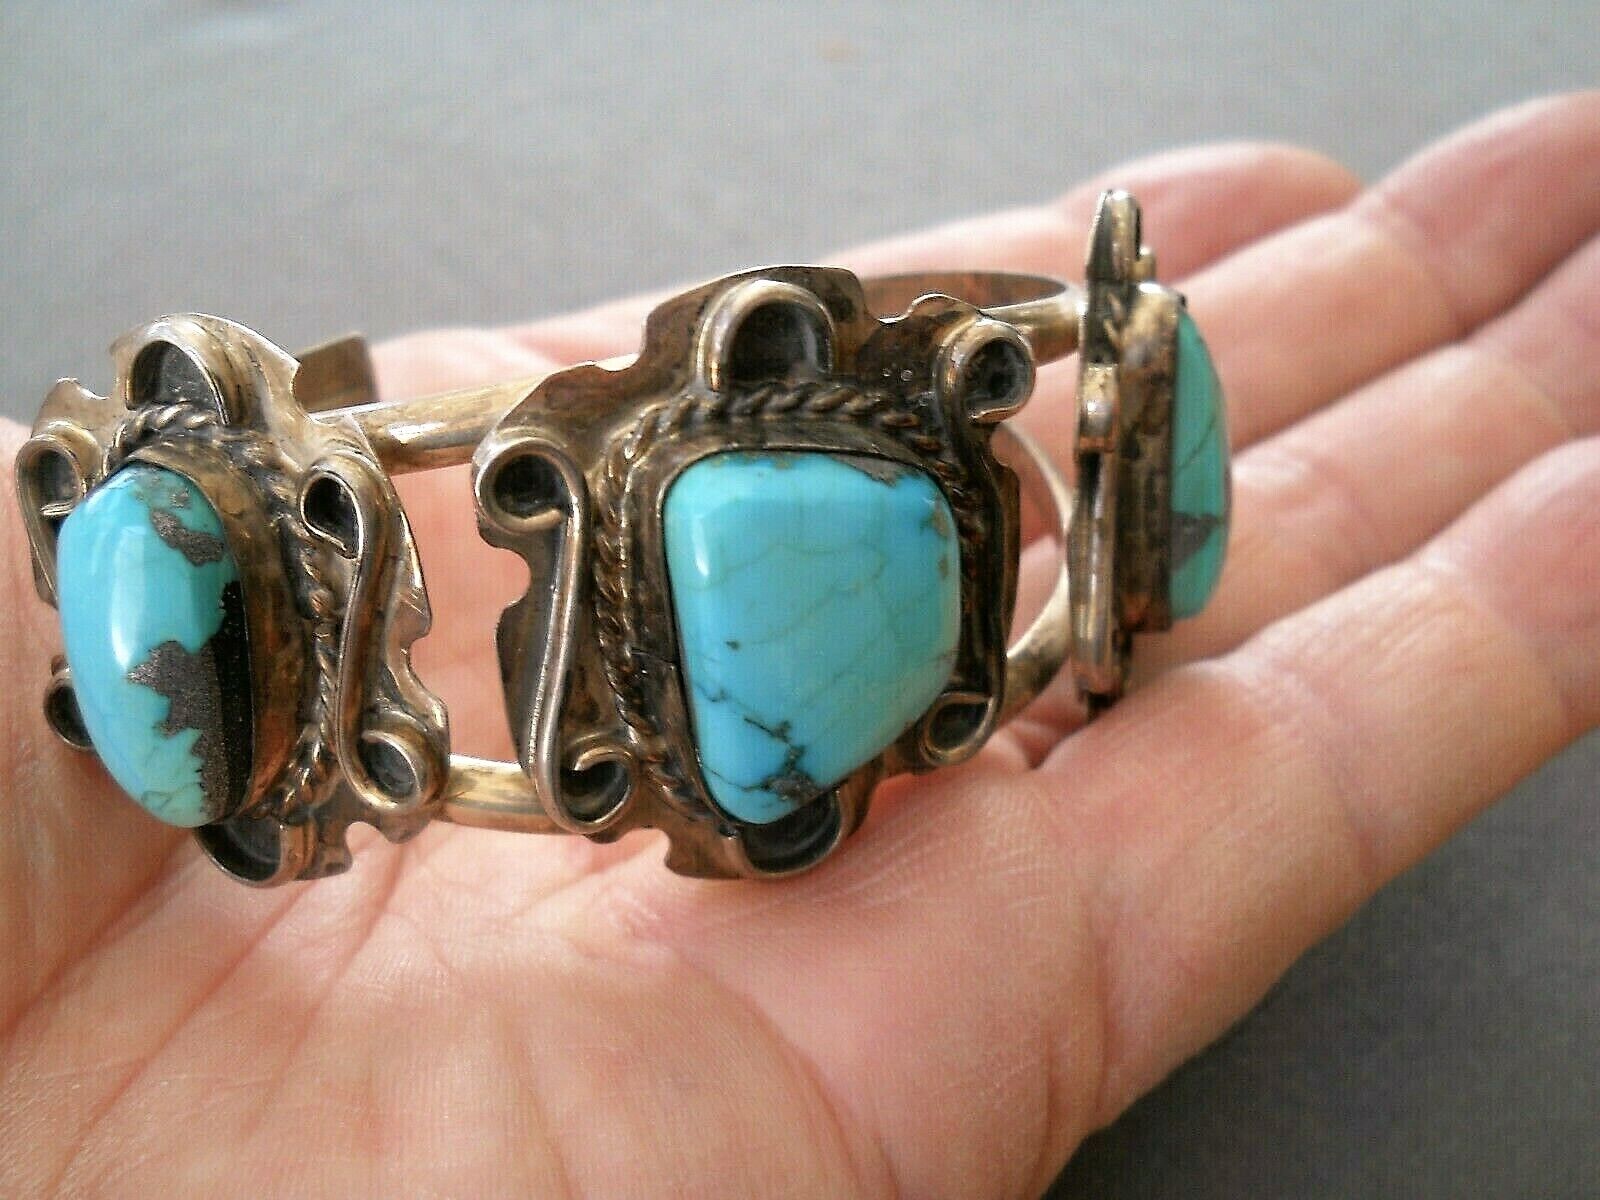 Old Southwestern Native American Indian Turquoise Sterling Silver Cuff Bracelet